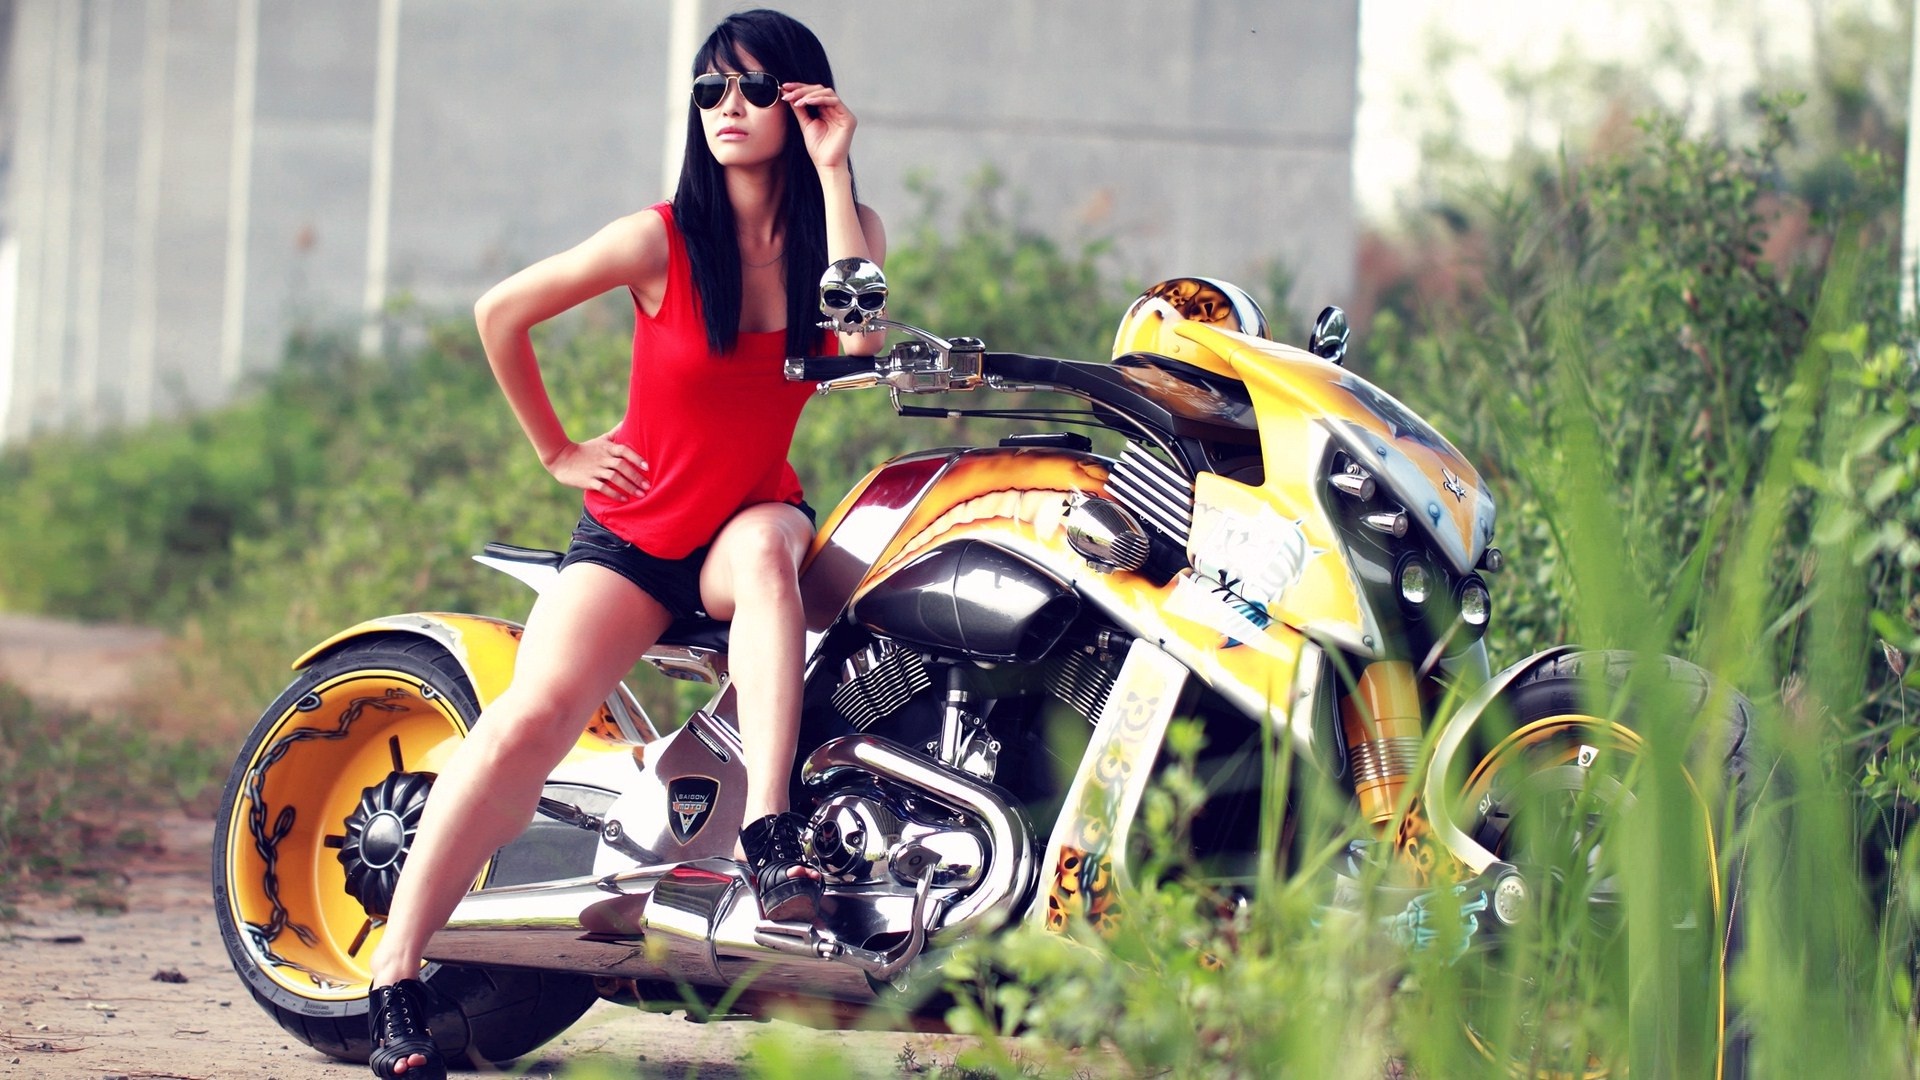 Hot modern stylish girl with super bike wallpapers